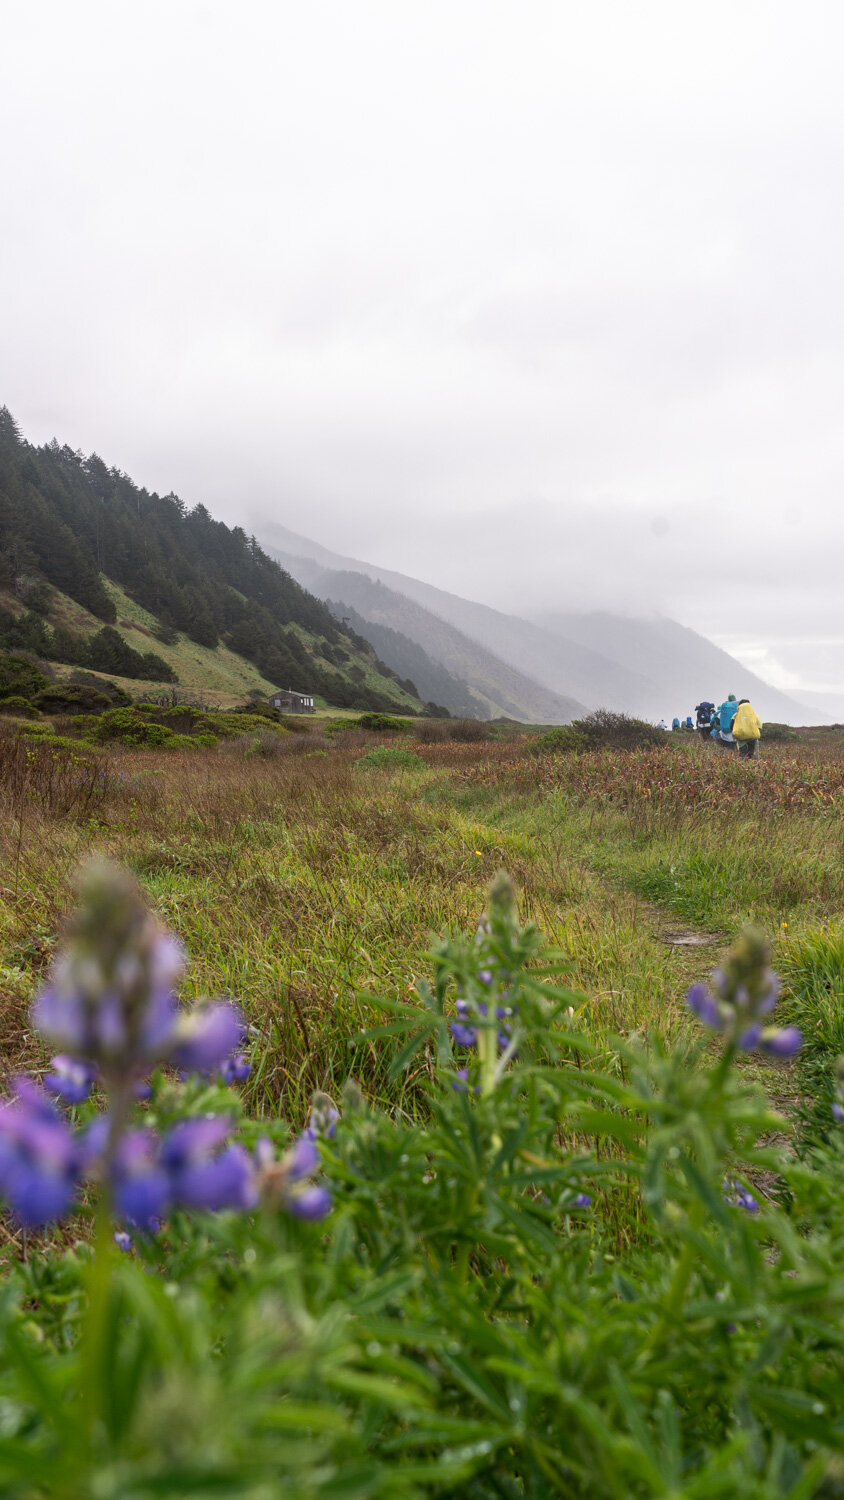 Backpacking the Lost Coast Trail in spring for wildflowers